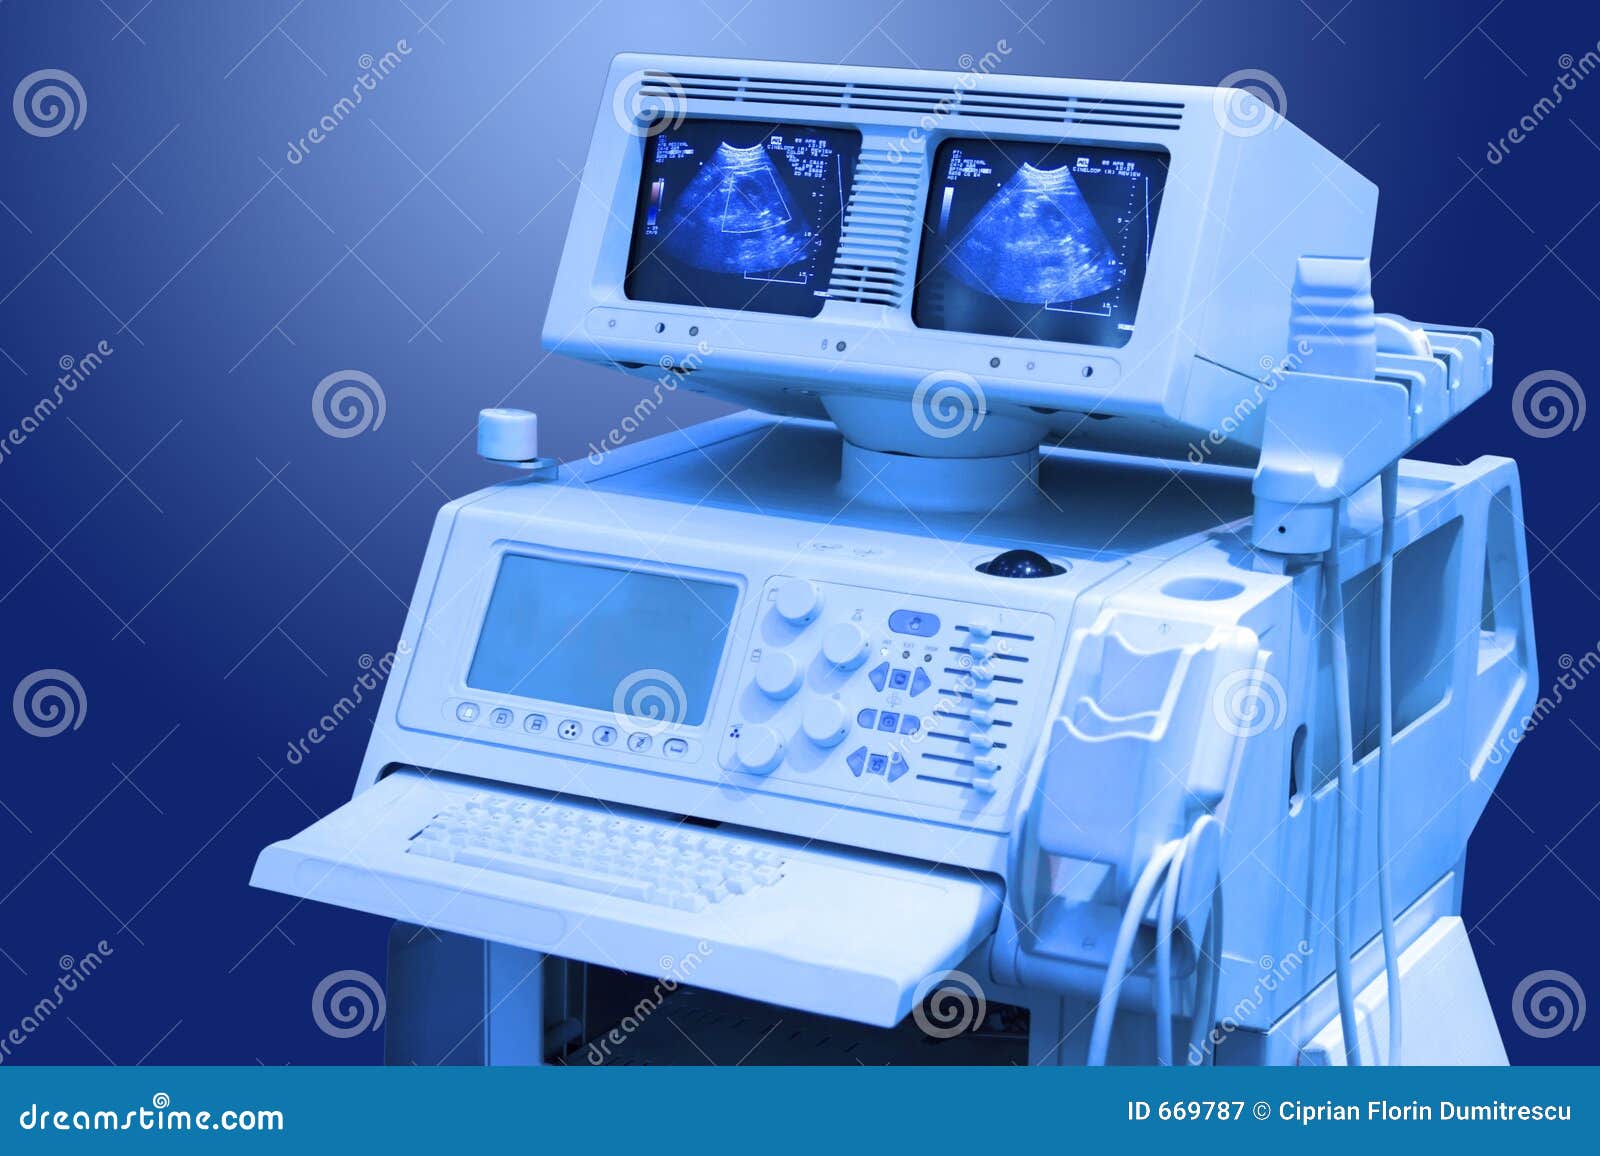 Ultrasound Medical Scanner Royalty Free Stock Photography ...